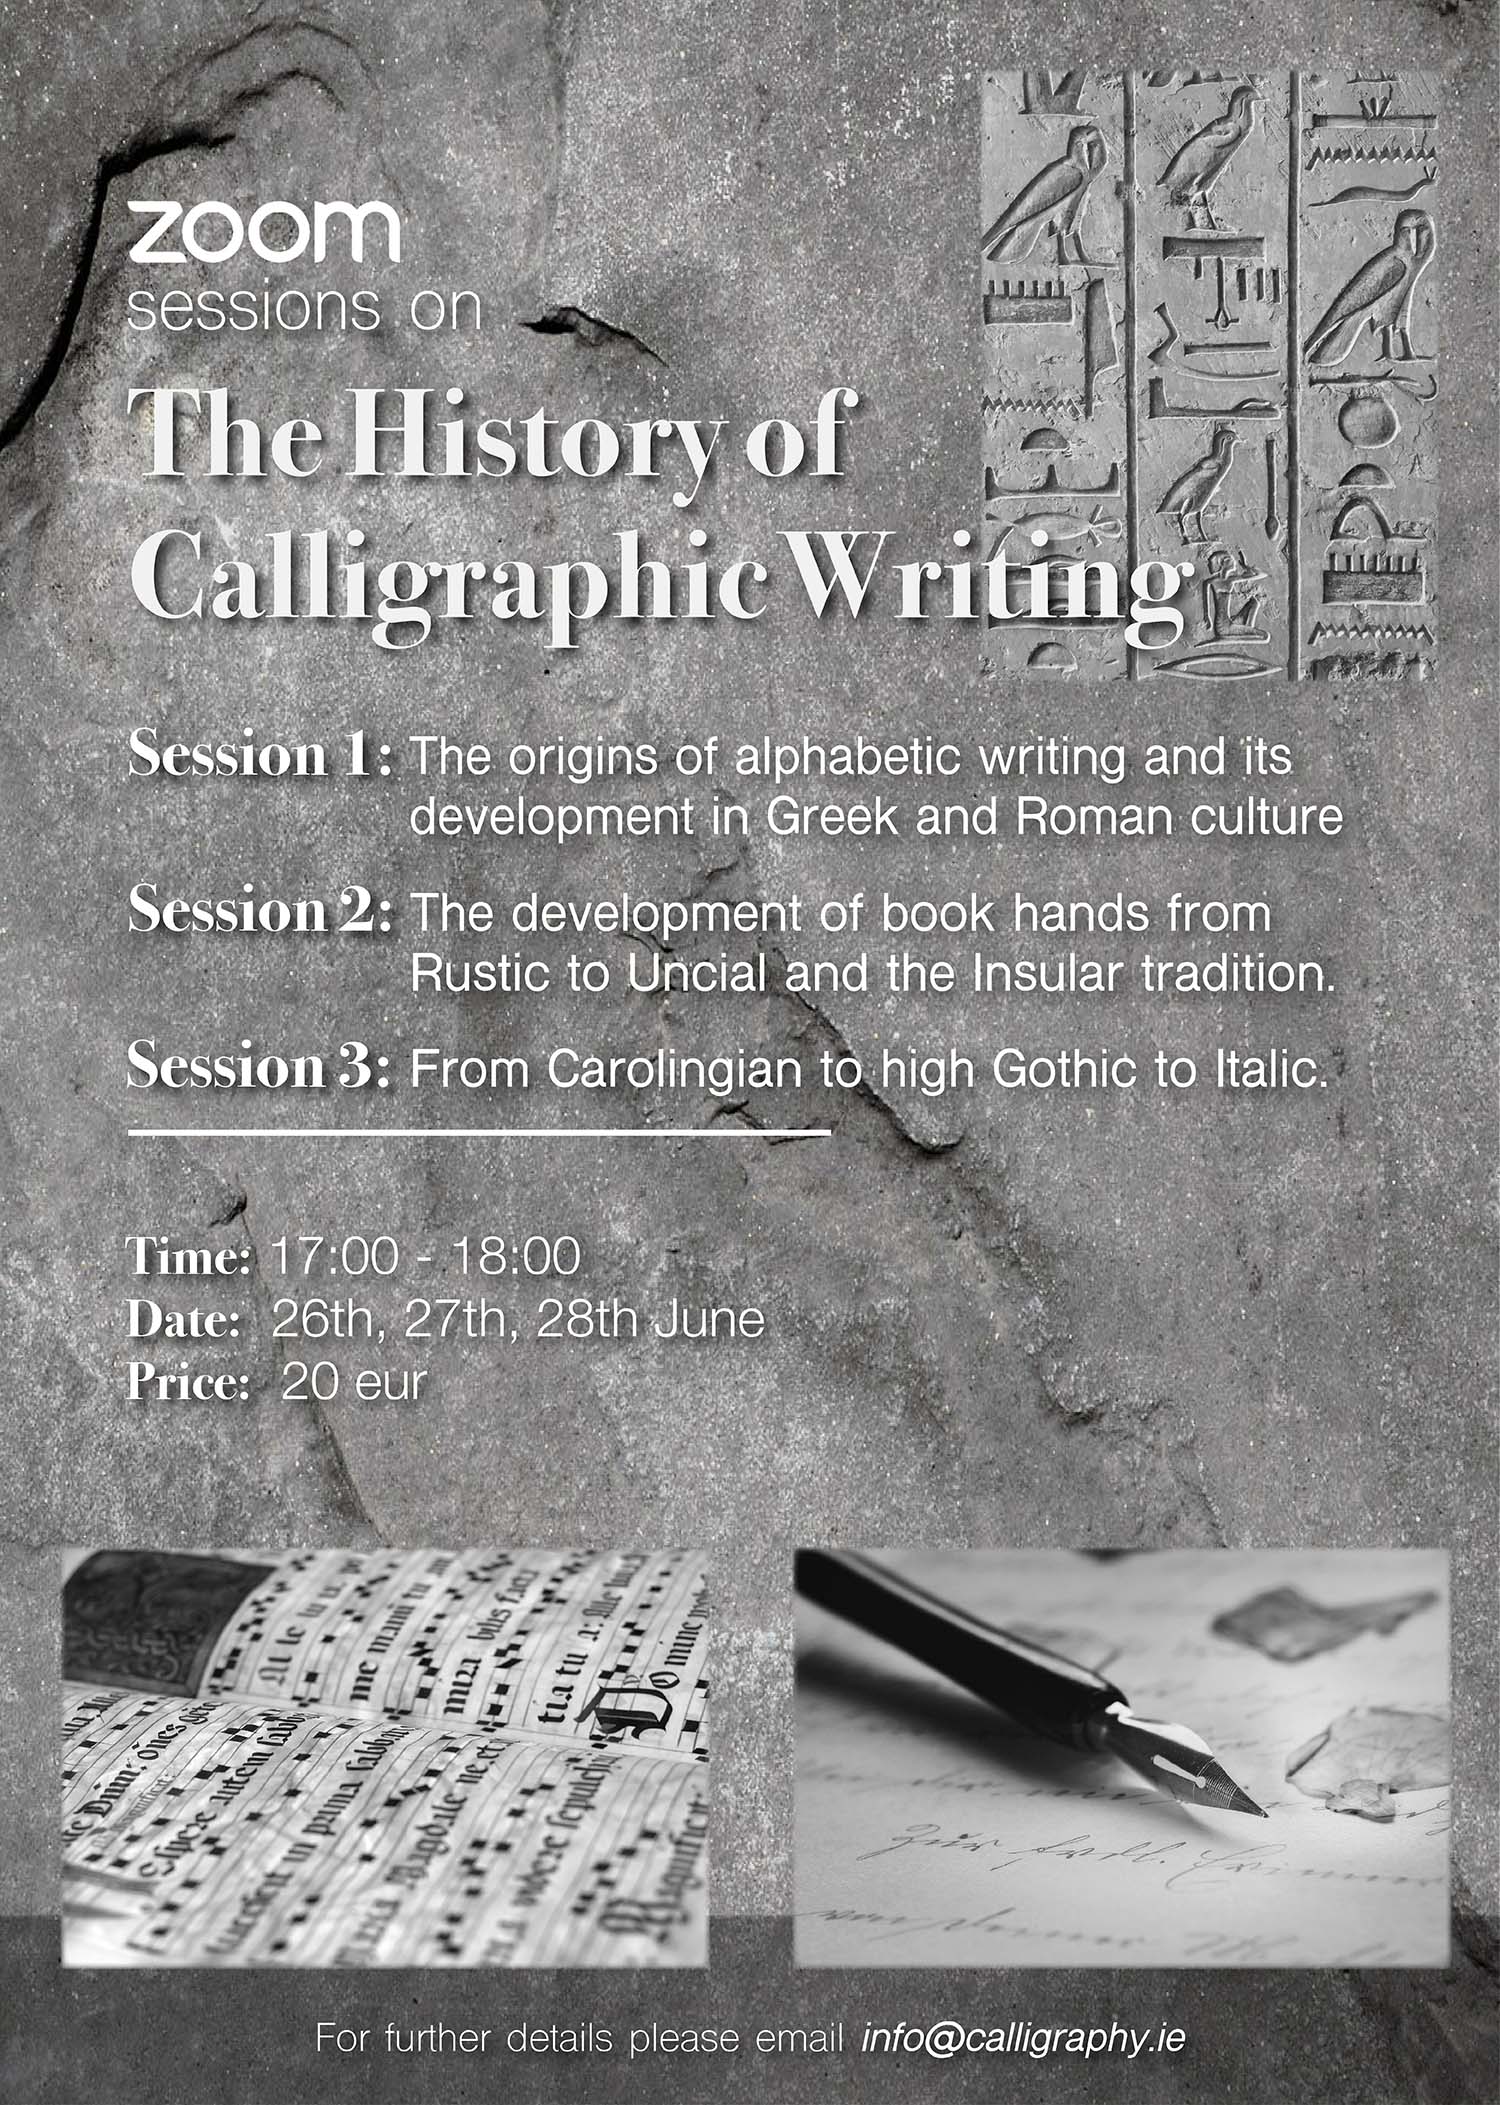 The History of Calligraphic Writing